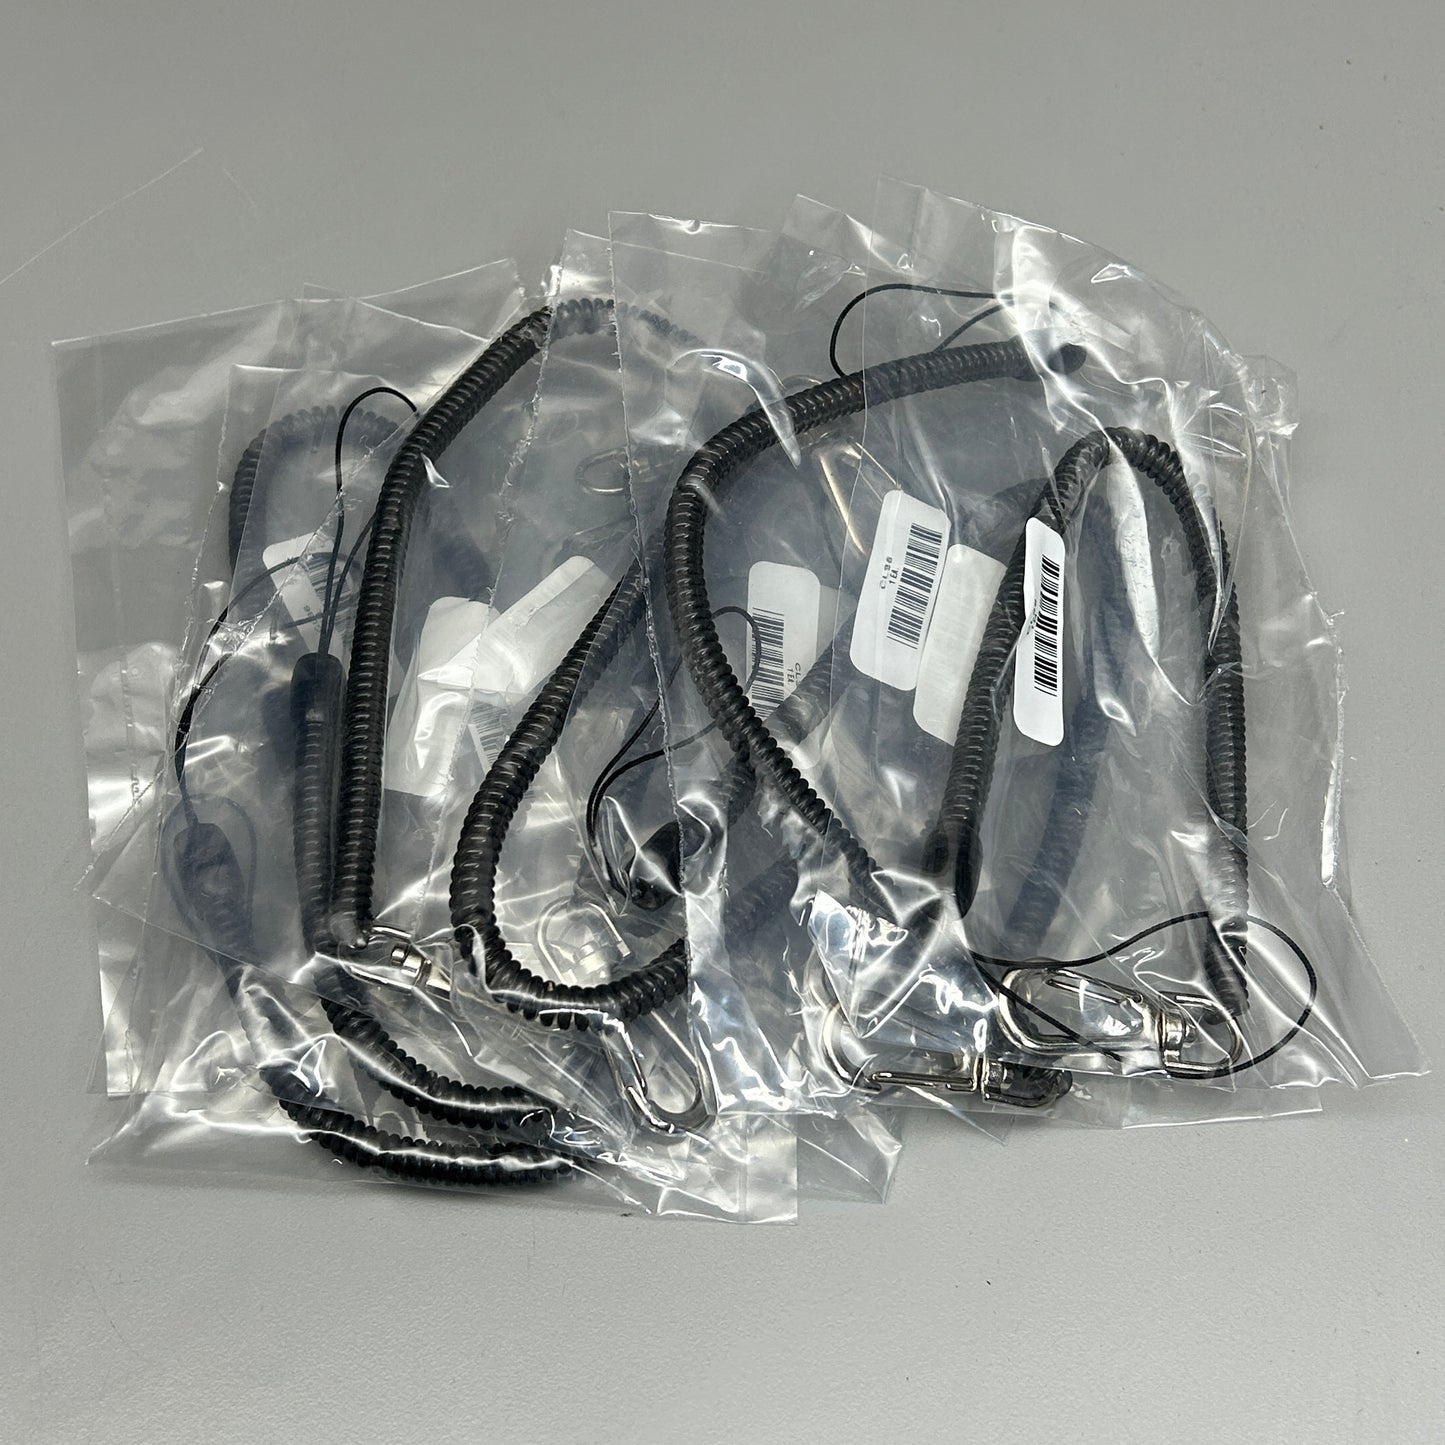 PACIFIC HANDY CUTTER 10-PACK! Coiled Clip Lanyard Elastomer w/ Nylon (New)